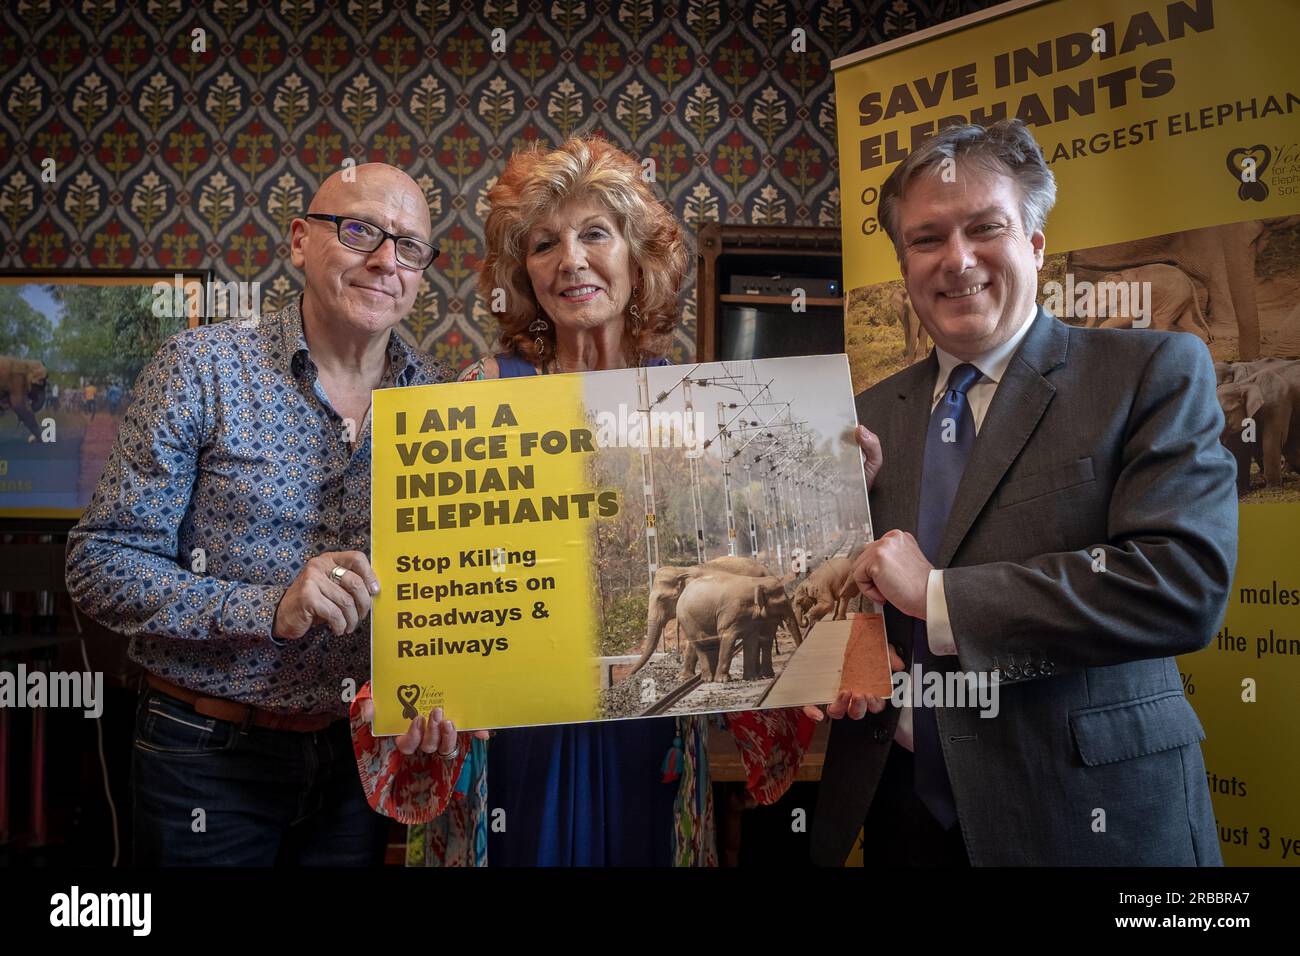 L-R British artist, Gary Hodges, actor Rula Lenska and MP Henry Smith show support on the Asian elephant crisis. Westminster, London, UK Stock Photo